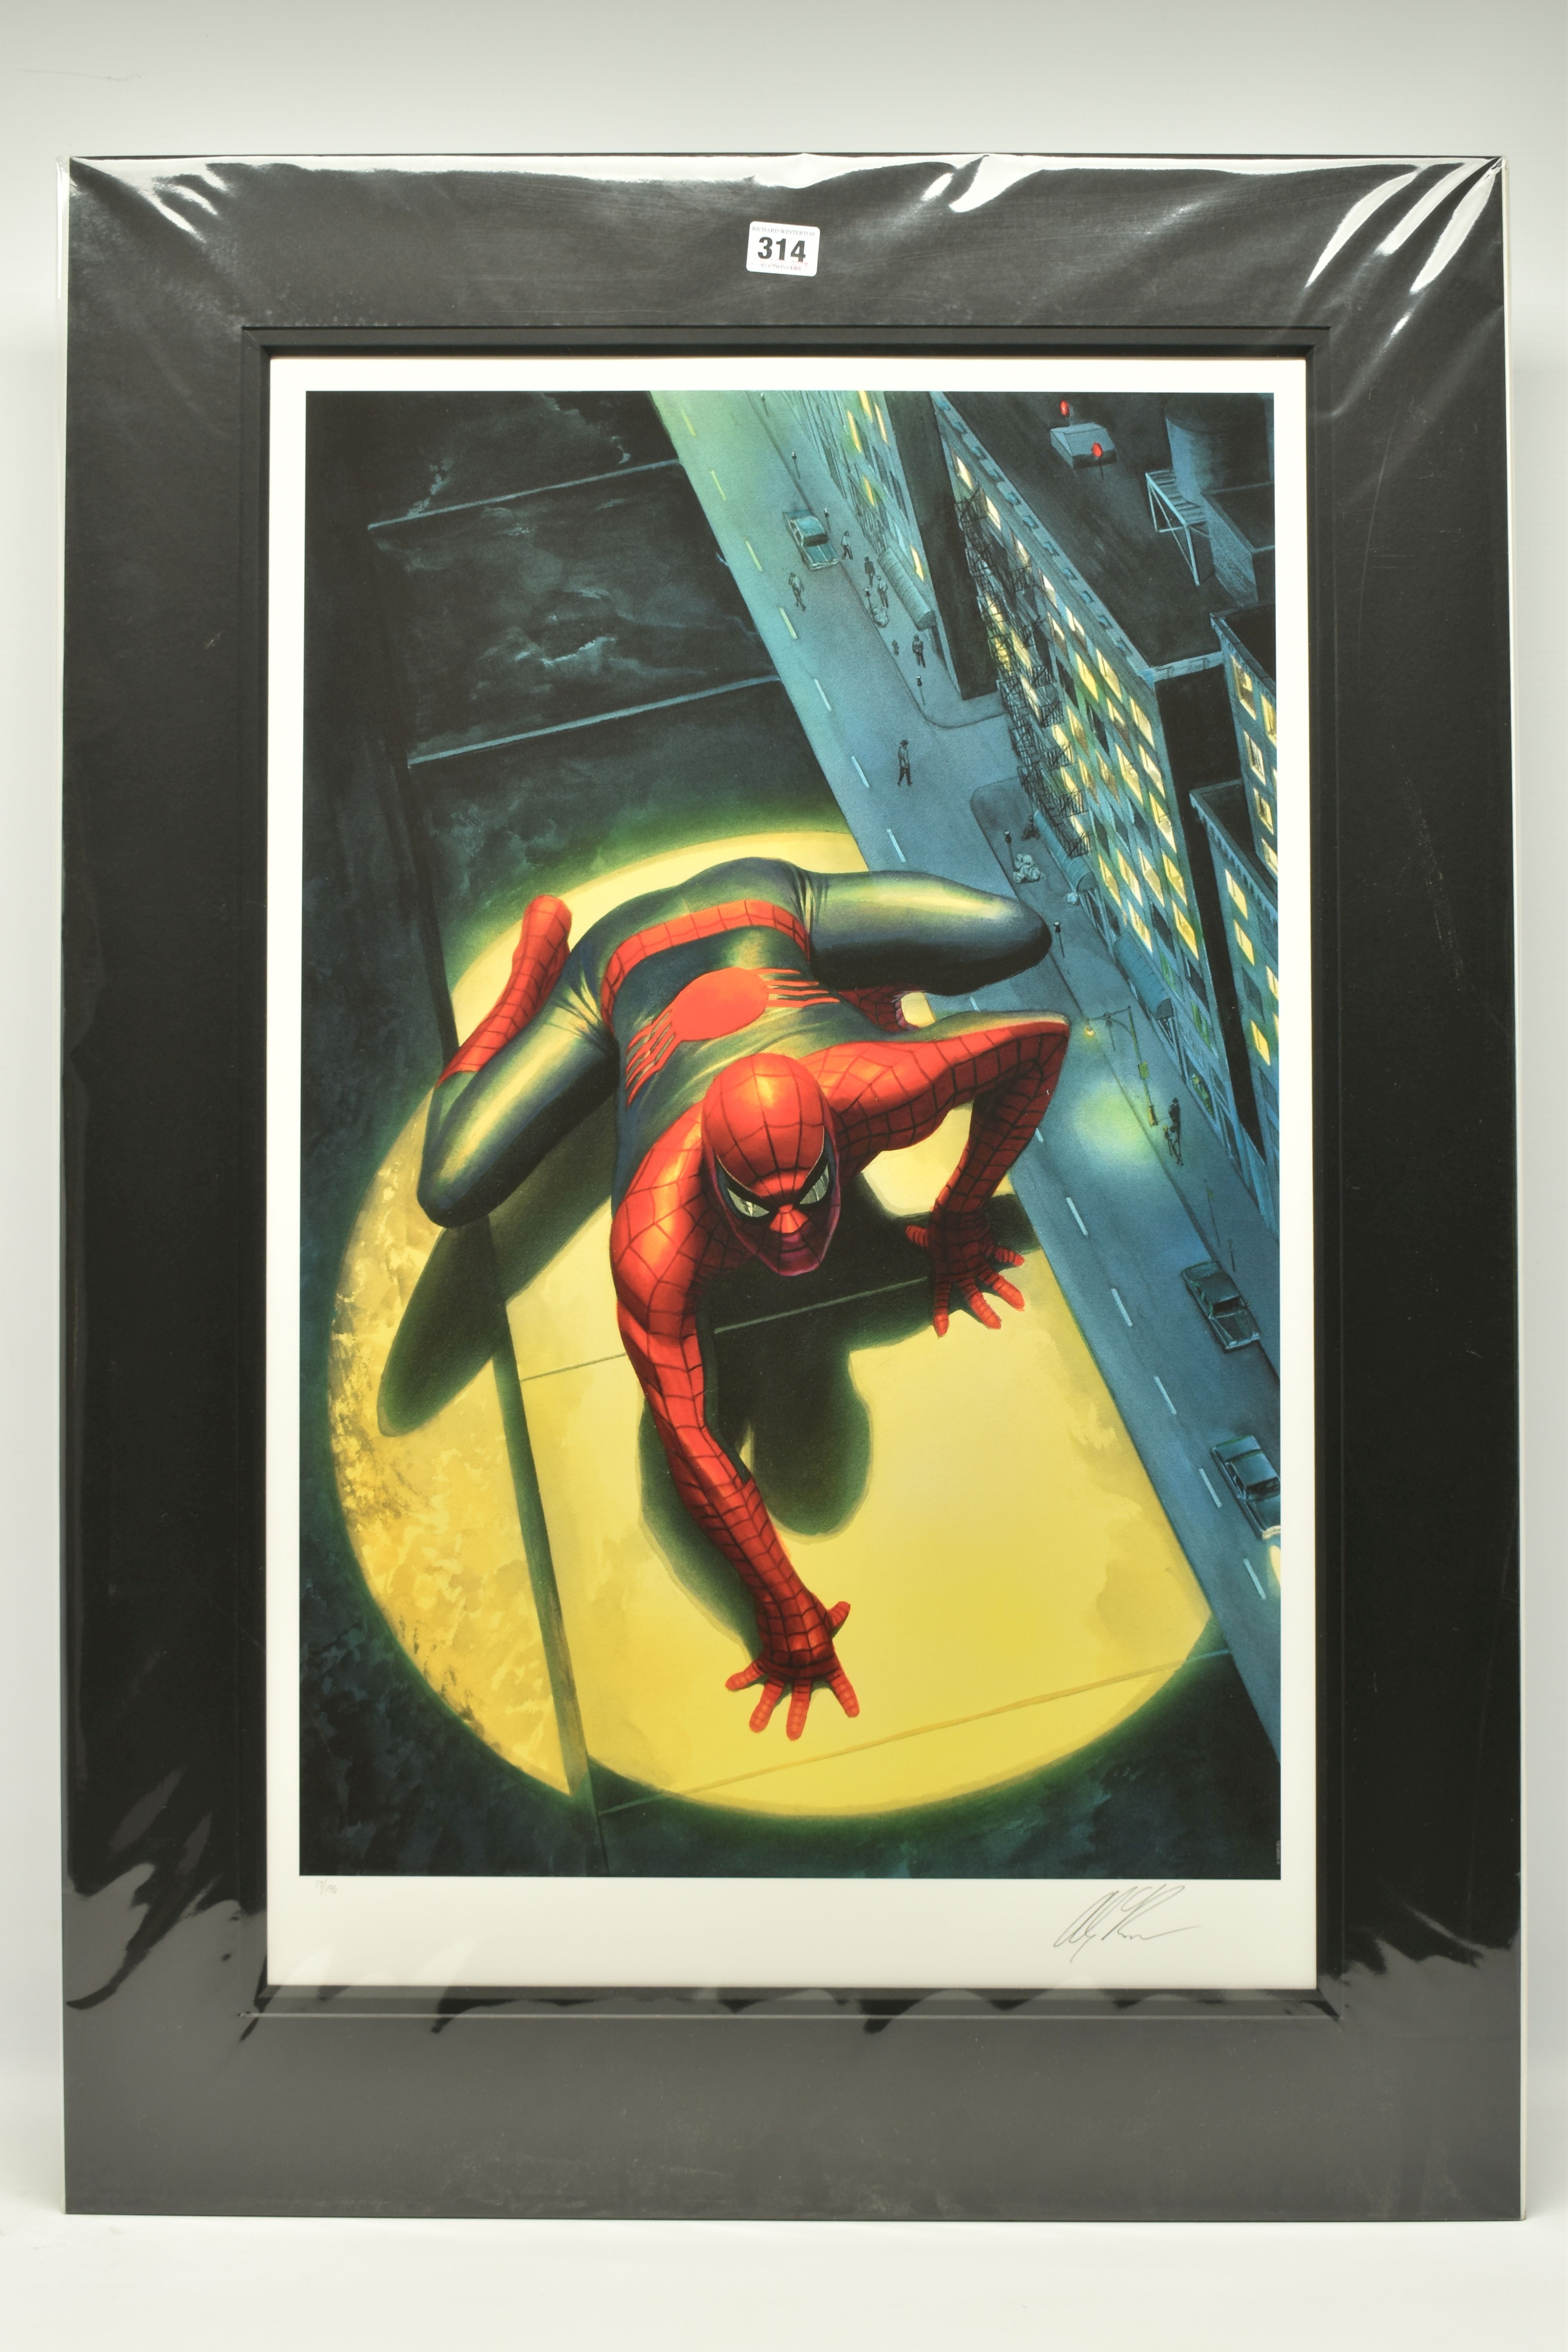 THE SPECTACULAR SPIDERMAN by Alex Ross